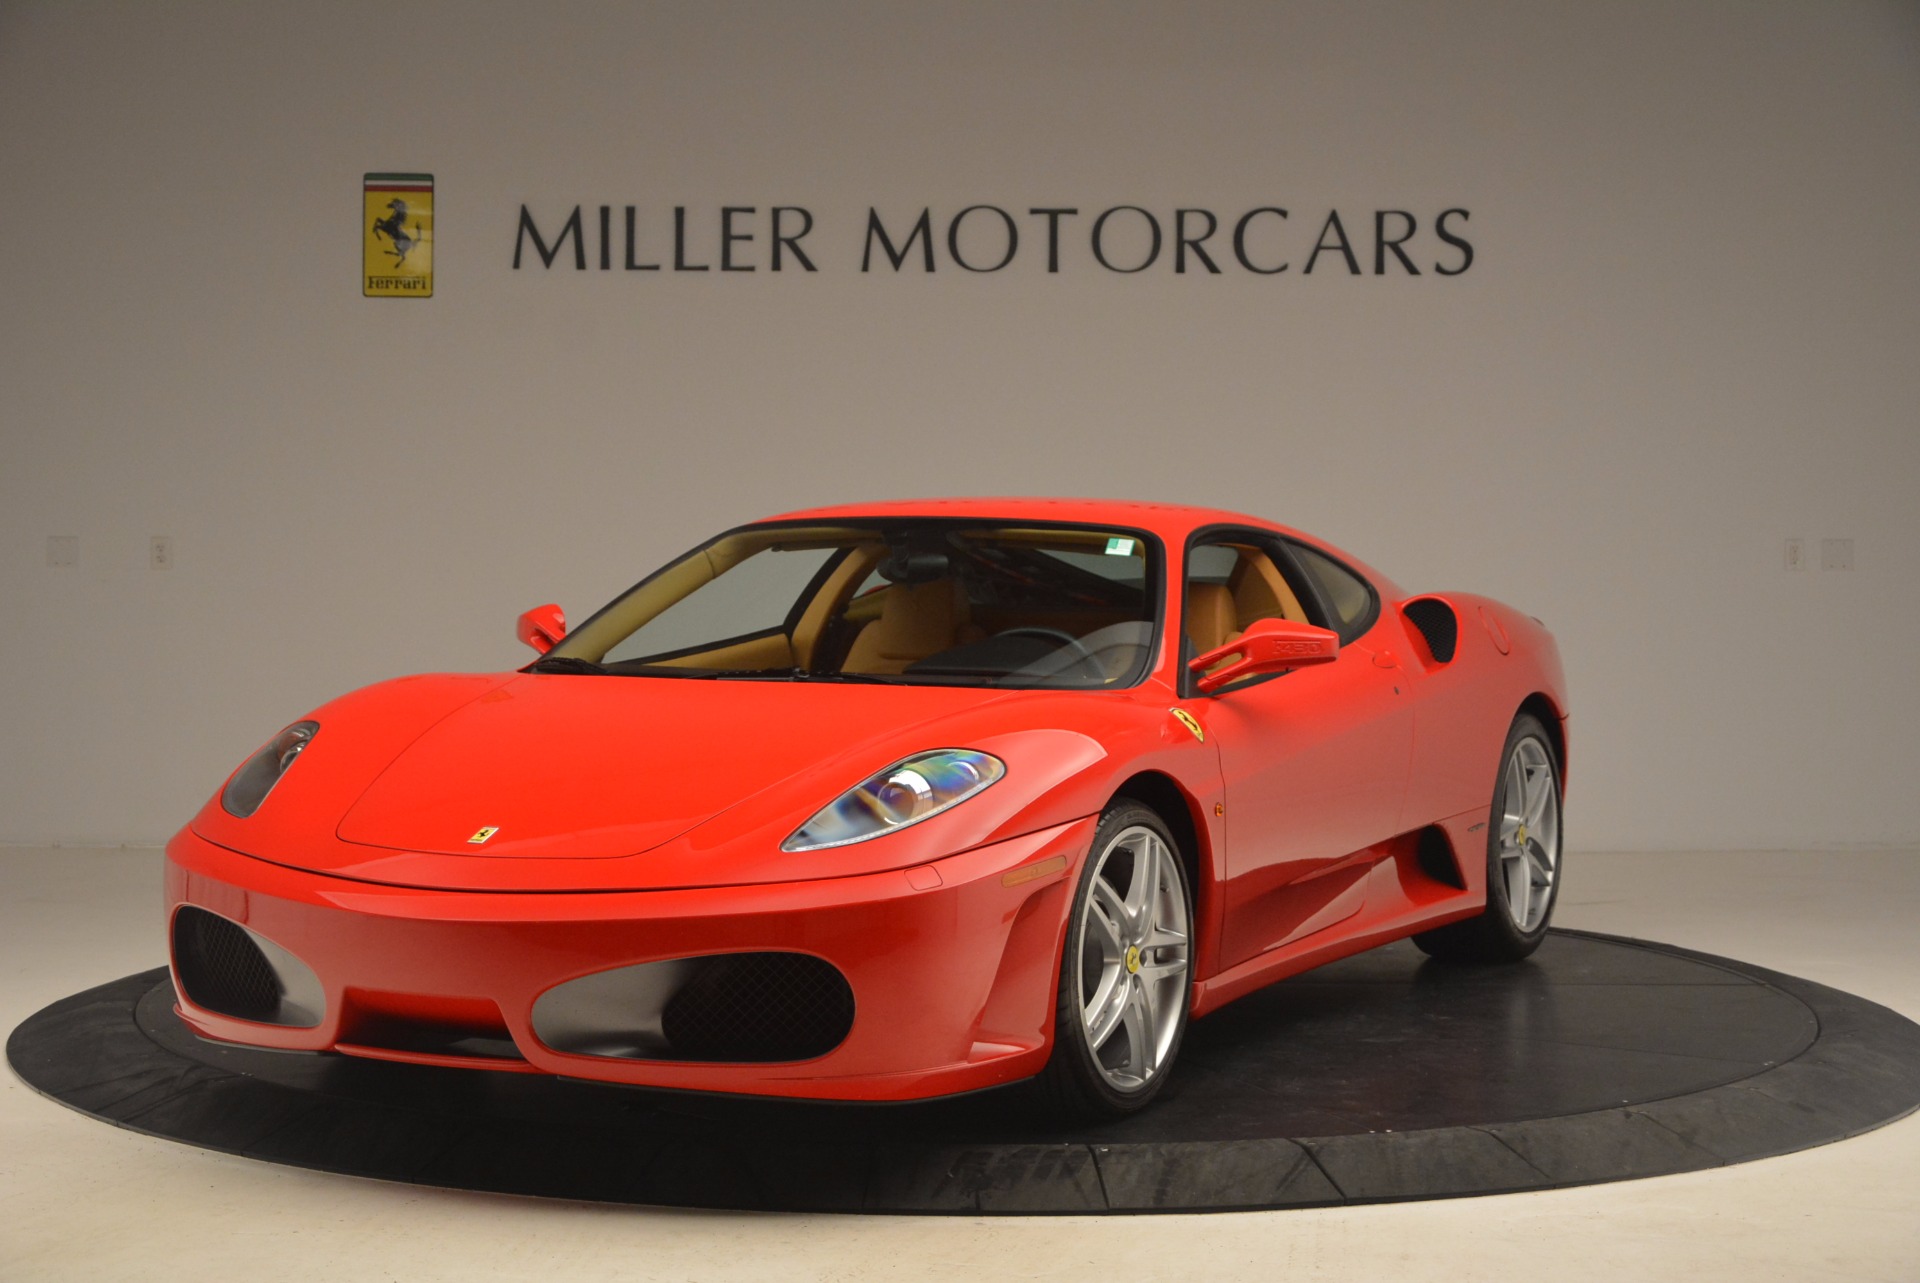 Used 2005 Ferrari F430 for sale Sold at Pagani of Greenwich in Greenwich CT 06830 1